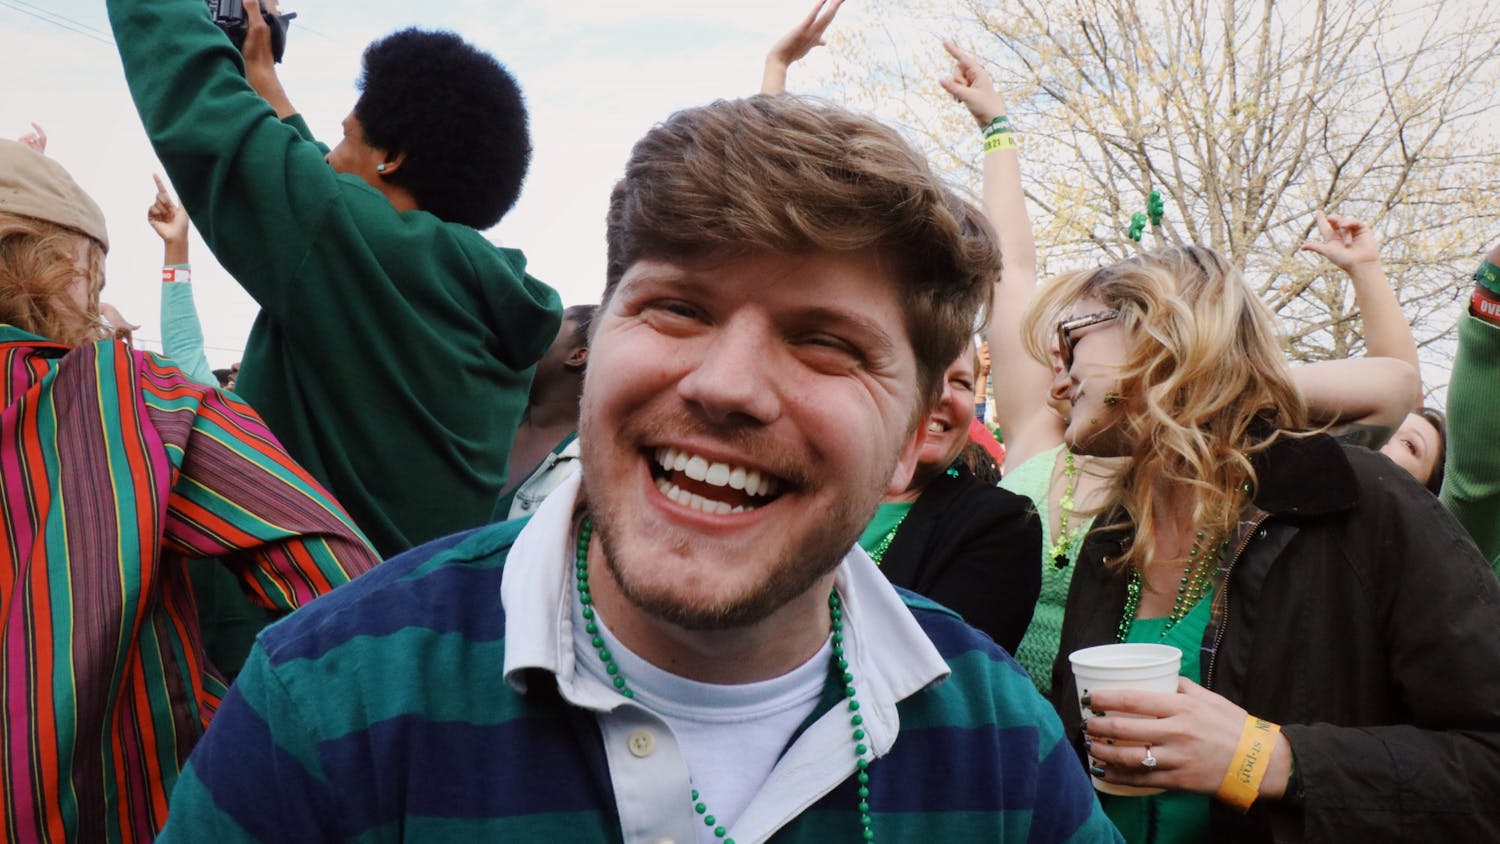 A festival attendee smiles while celebrating at the St. Pat's in Five Points event on March 18, 2023. Attendees had the opportunity to eat, drink, listen to music and much more at the celebration in downtown Columbia.&nbsp;